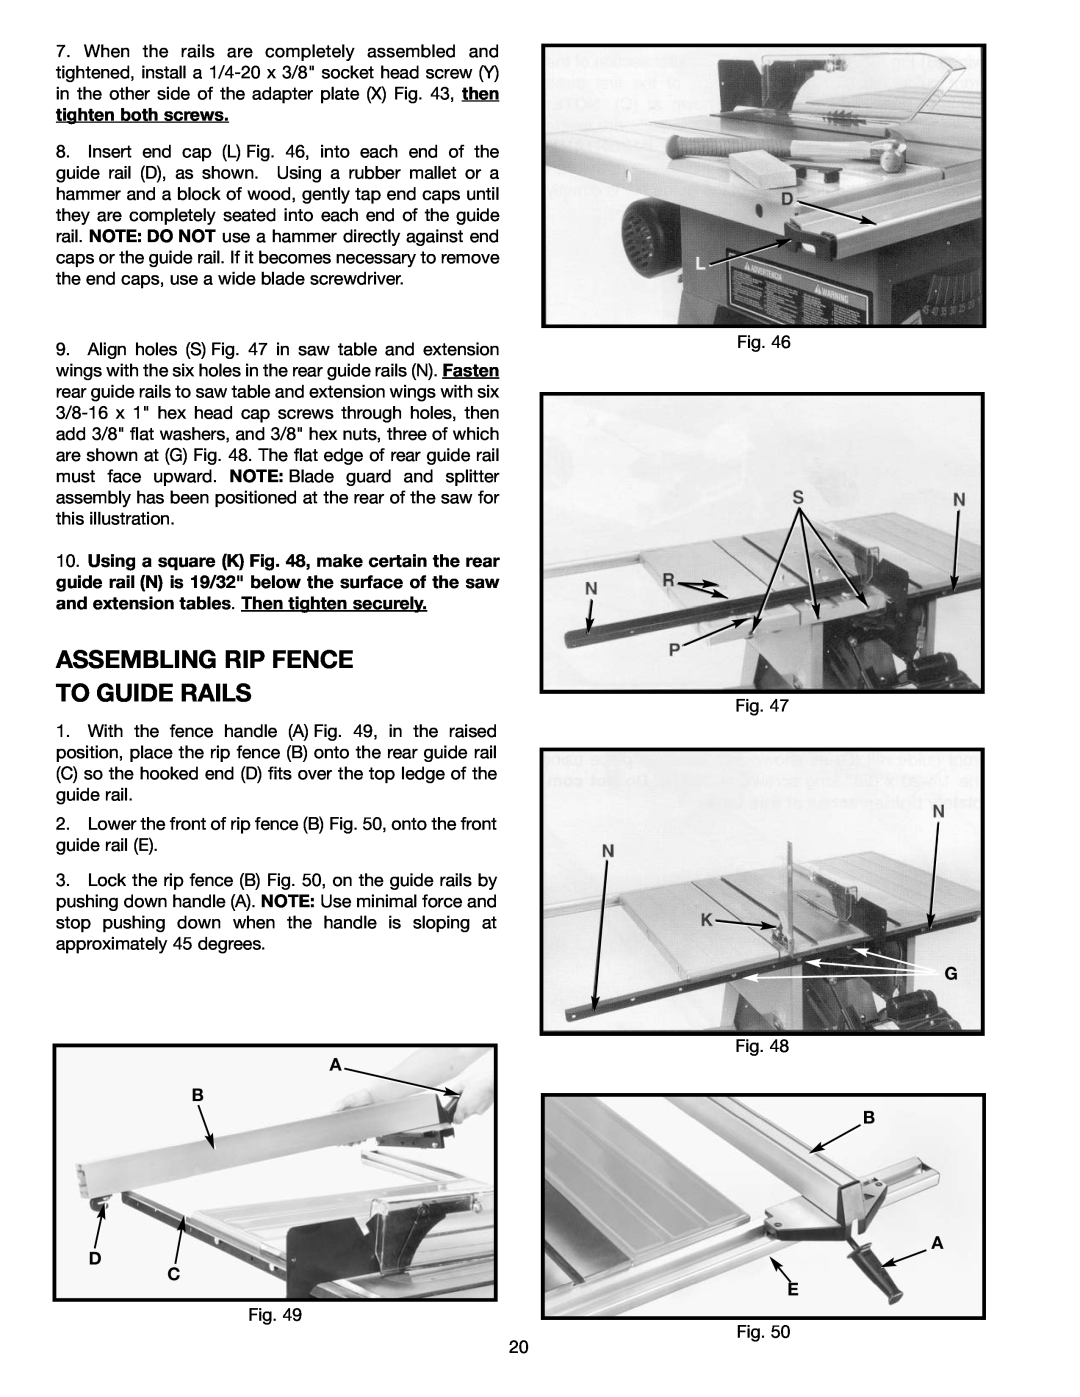 Delta 36-465 instruction manual Assembling Rip Fence To Guide Rails, B A E 